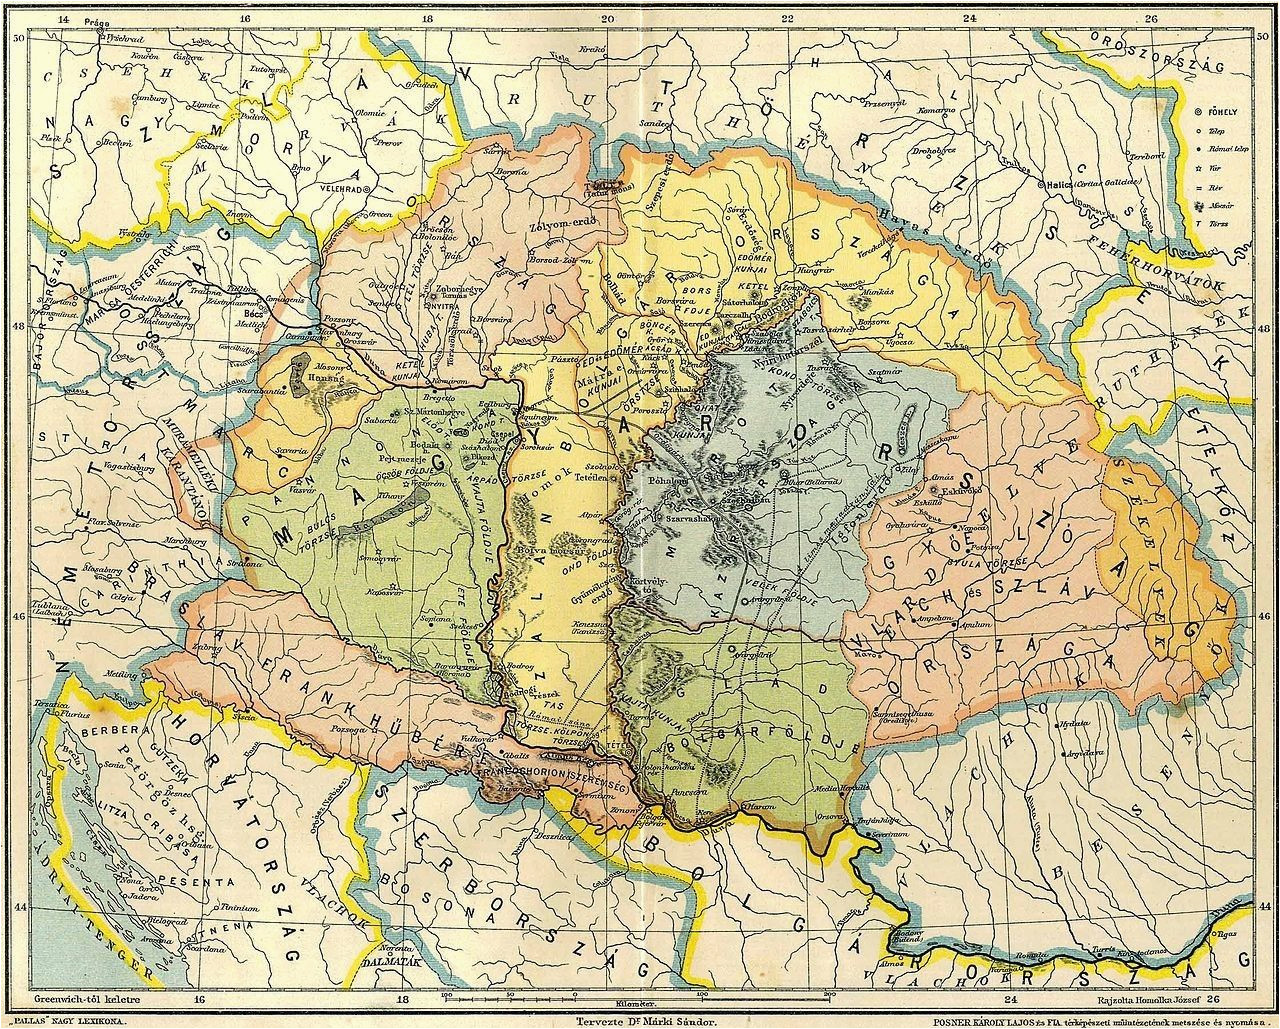 map of central europe in the 9th century before arrival of